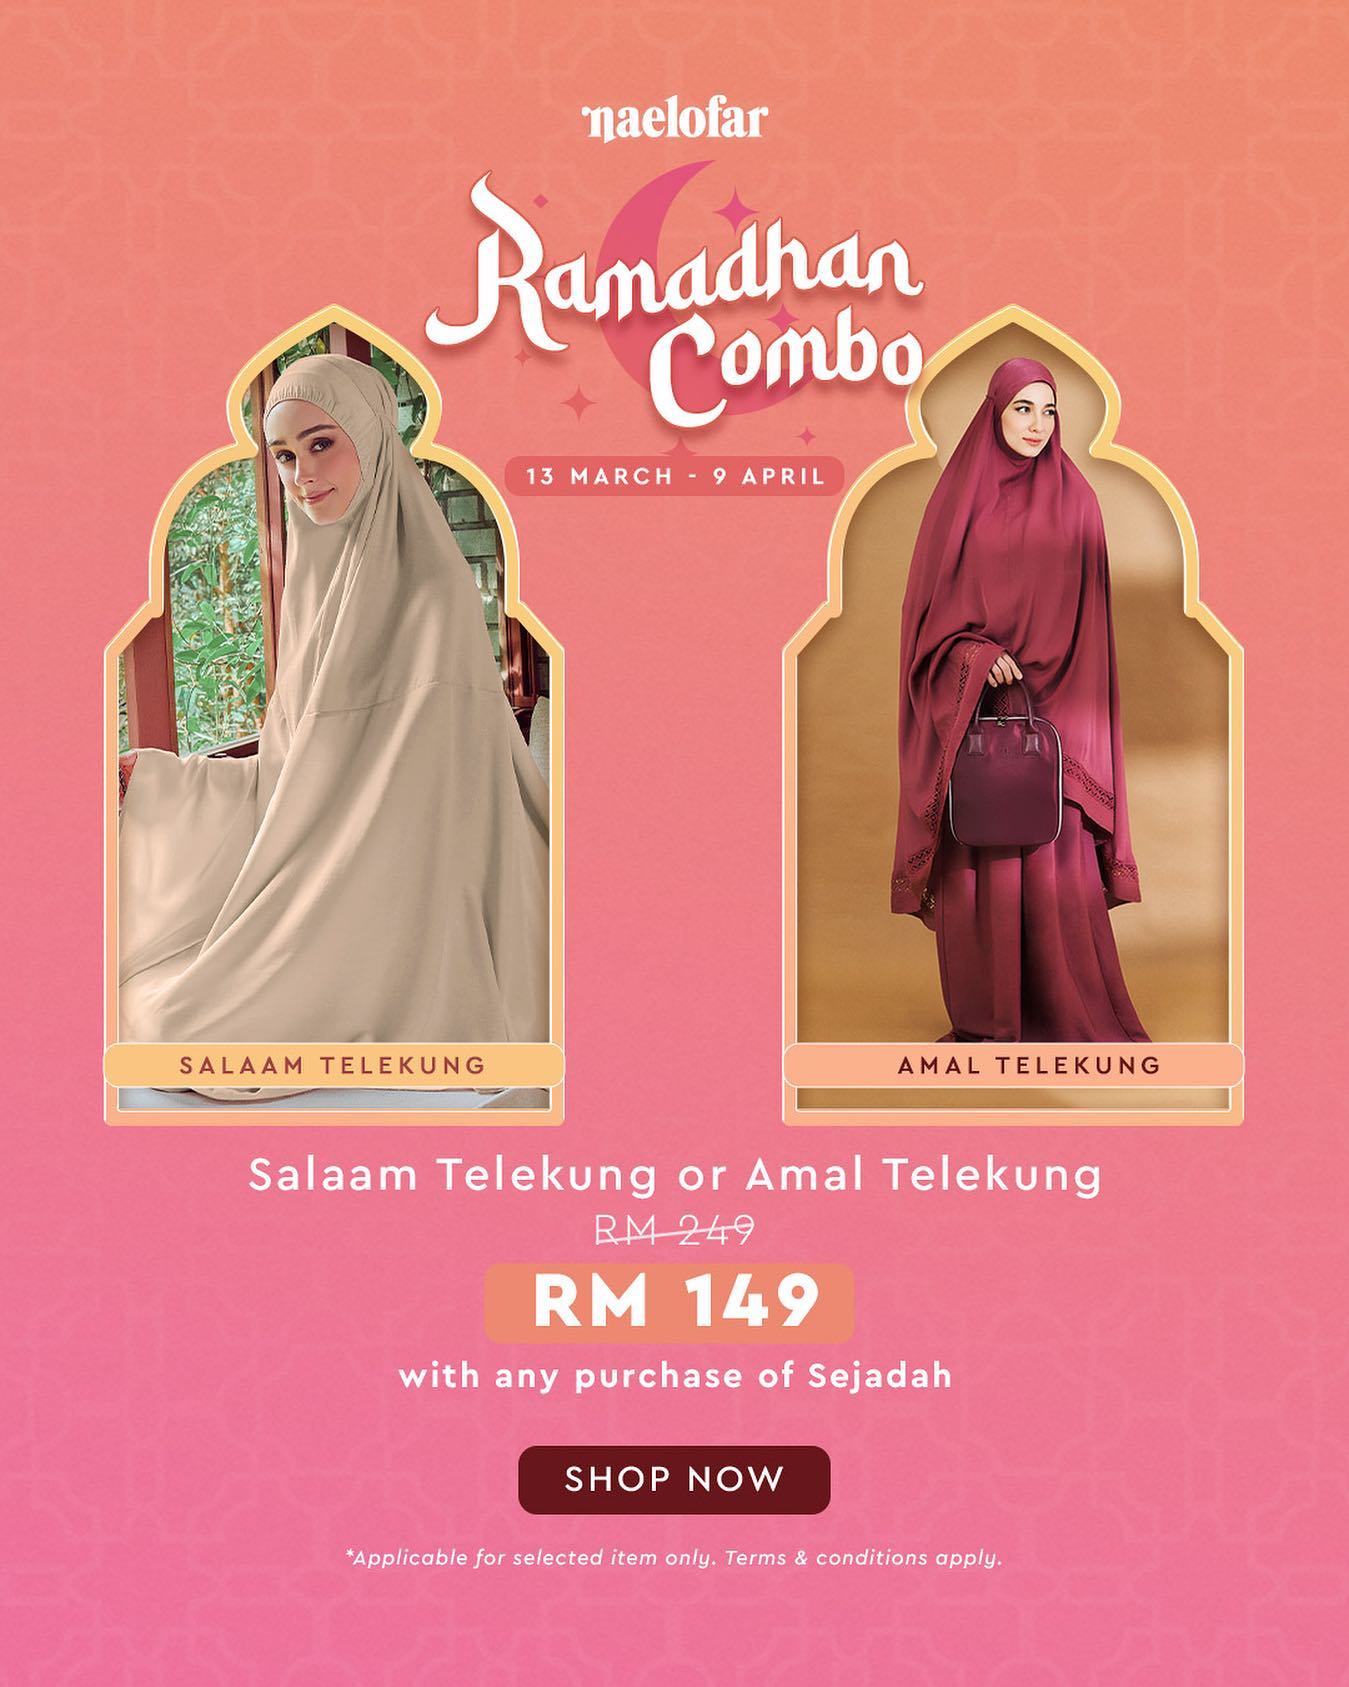 Get Ramadhan ready with this Ramadhan Combo promo happening now! If you've been eyeing our Telekung and Sejadah for a while, this is the perfect time to get your hands on 'em. That's right, get either Telekung at RM149 with any purchase of Sejadah✨ Tag someone you know who wouldn't wanna miss this deal. Don't say we tak payung 💁🏻‍♀️ <br/>
<br/>
#Naelofar